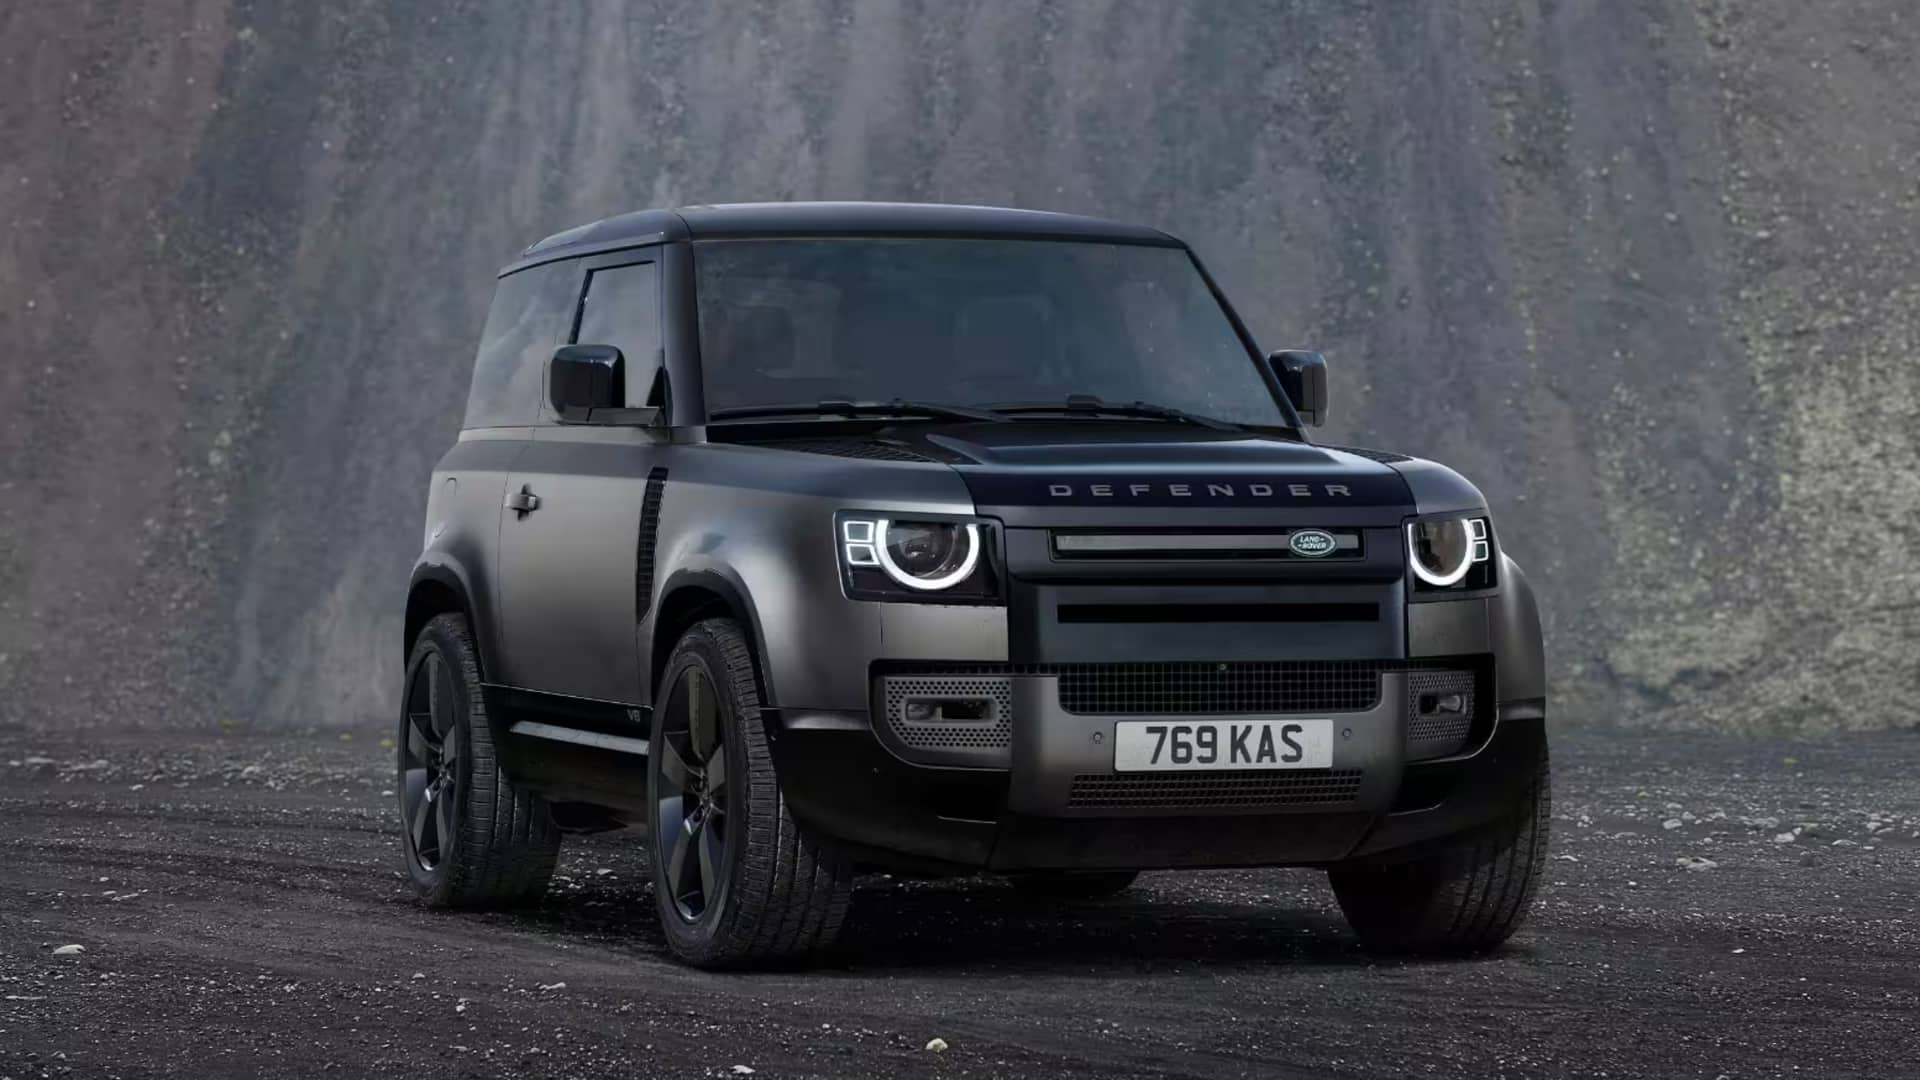 Baby Defender to join Land Rover's line-up in 2027